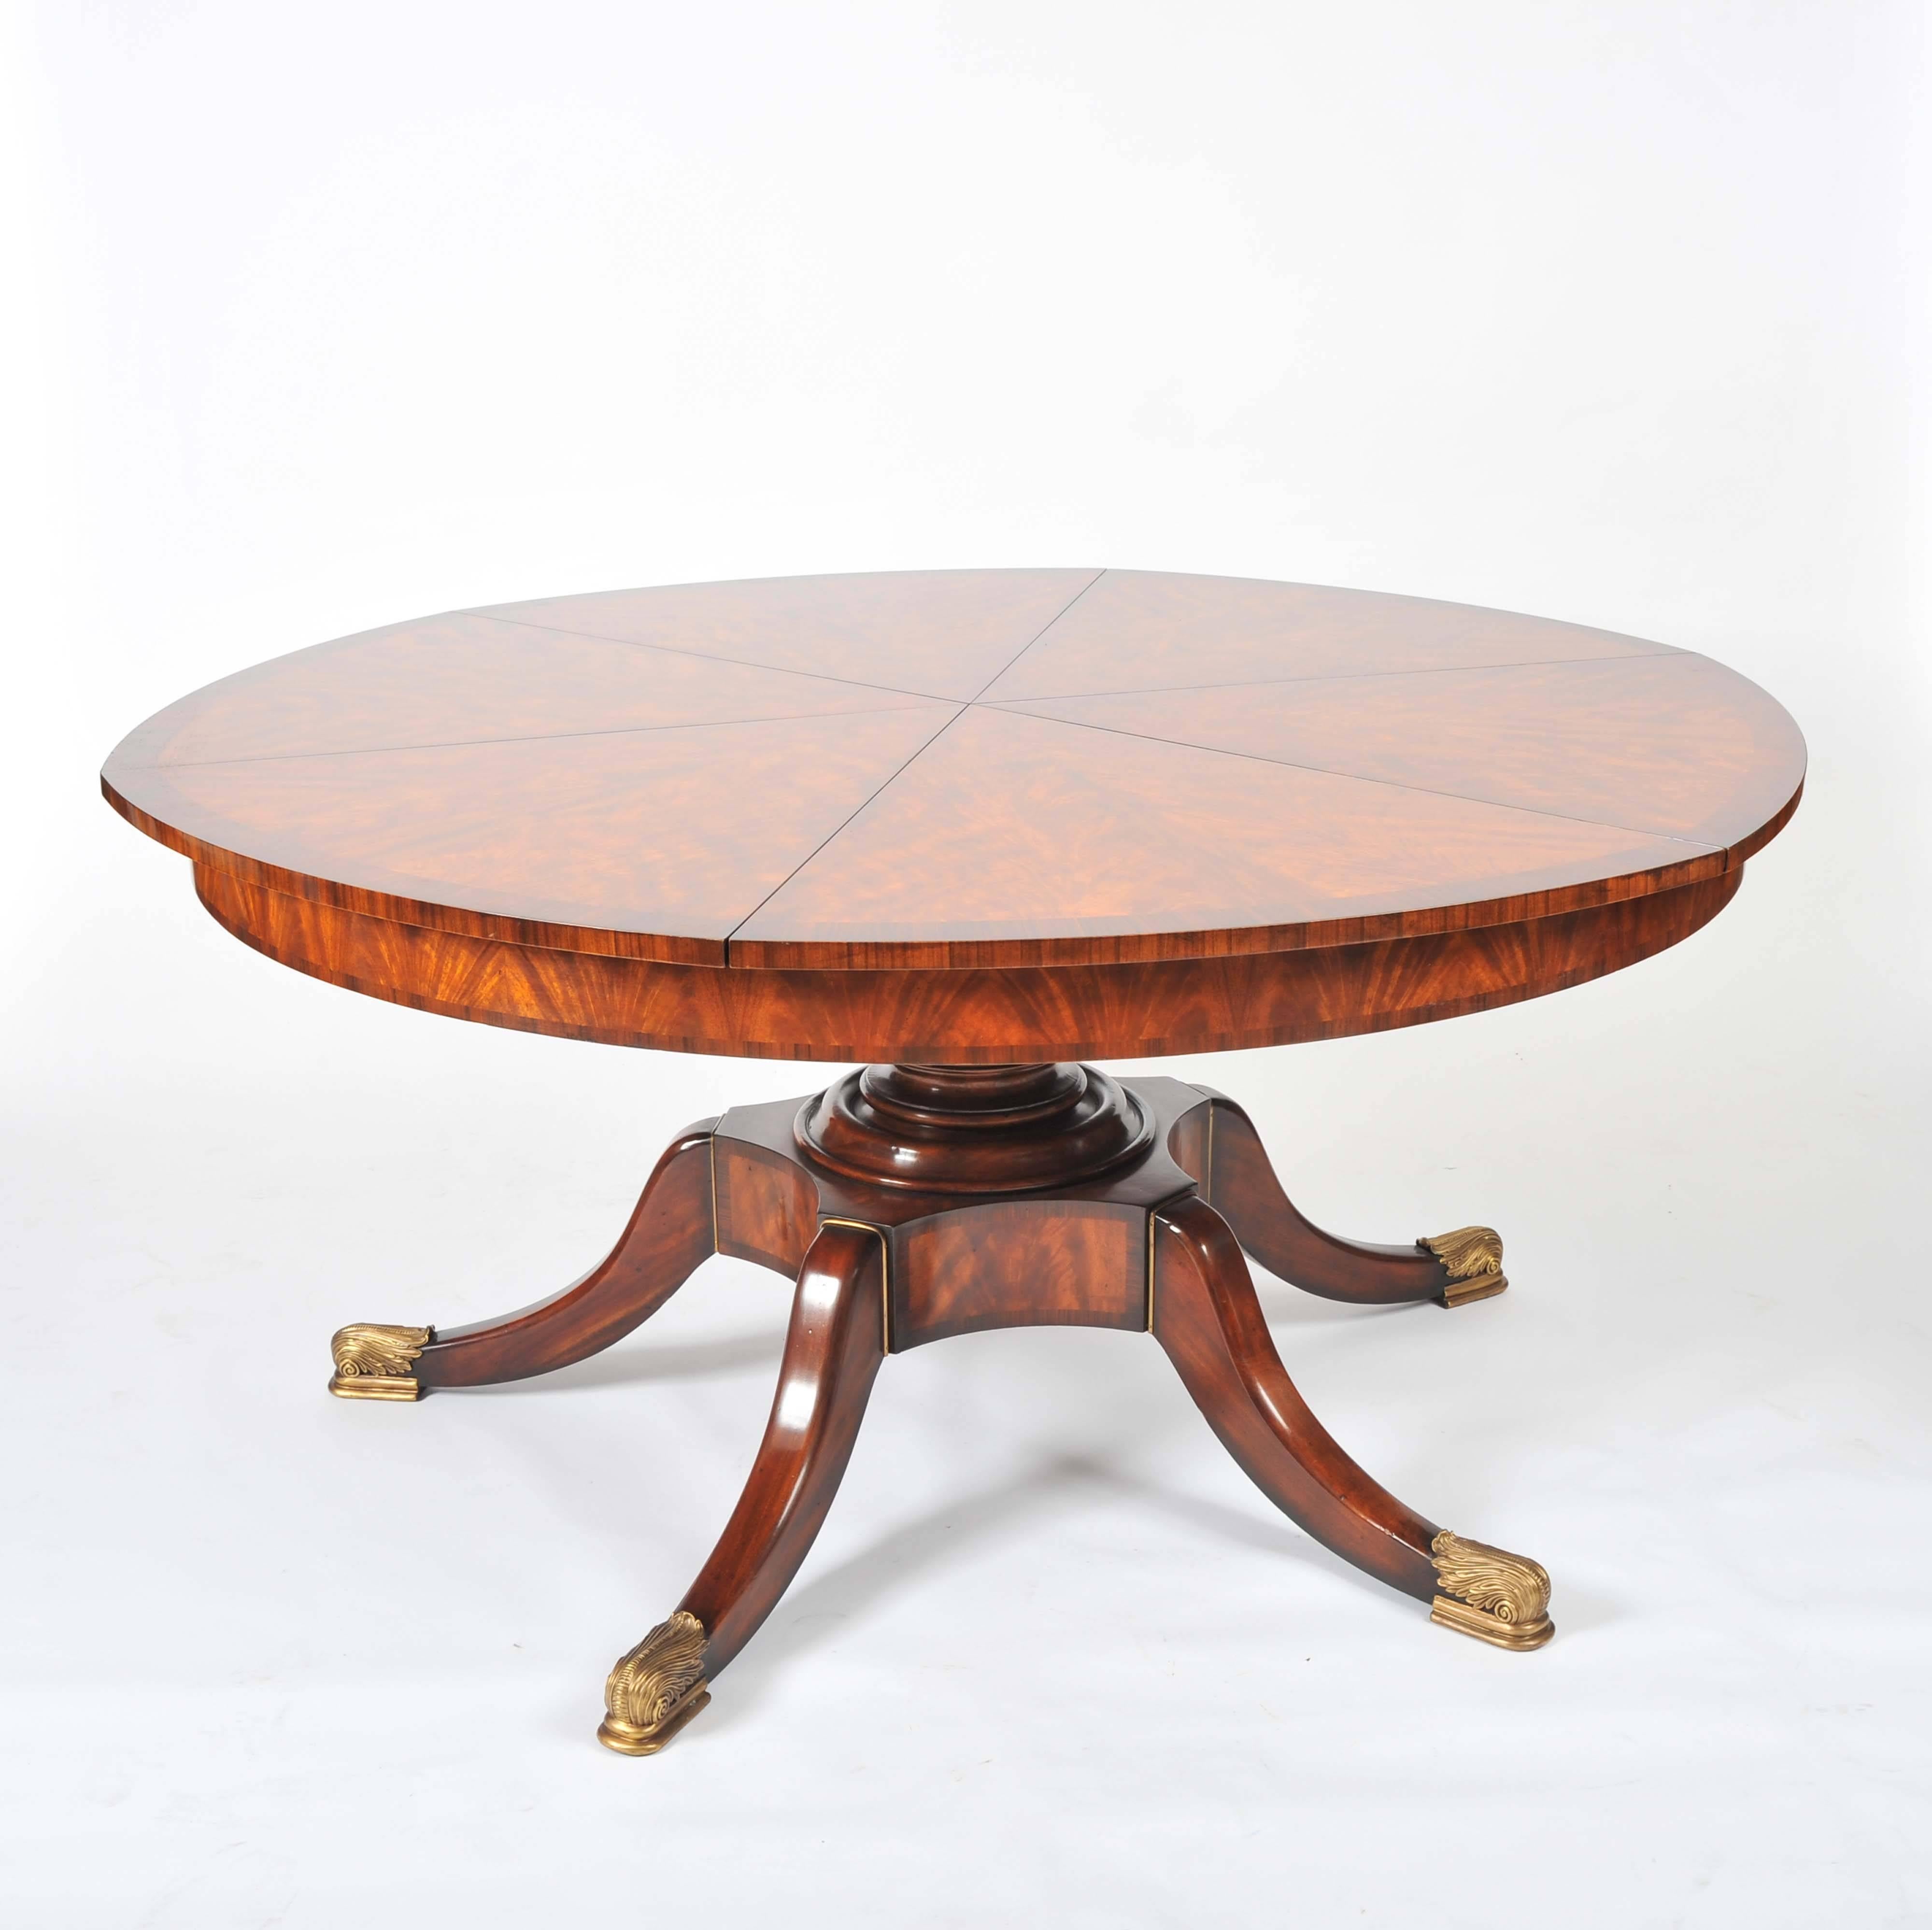 This stunning and beautifully designed flame mahogany segmented circular extending table is in the Regency style, and features leaves that are internally stored. The table comfortably seats six, and extends to seat eight to 10. The table rests on a